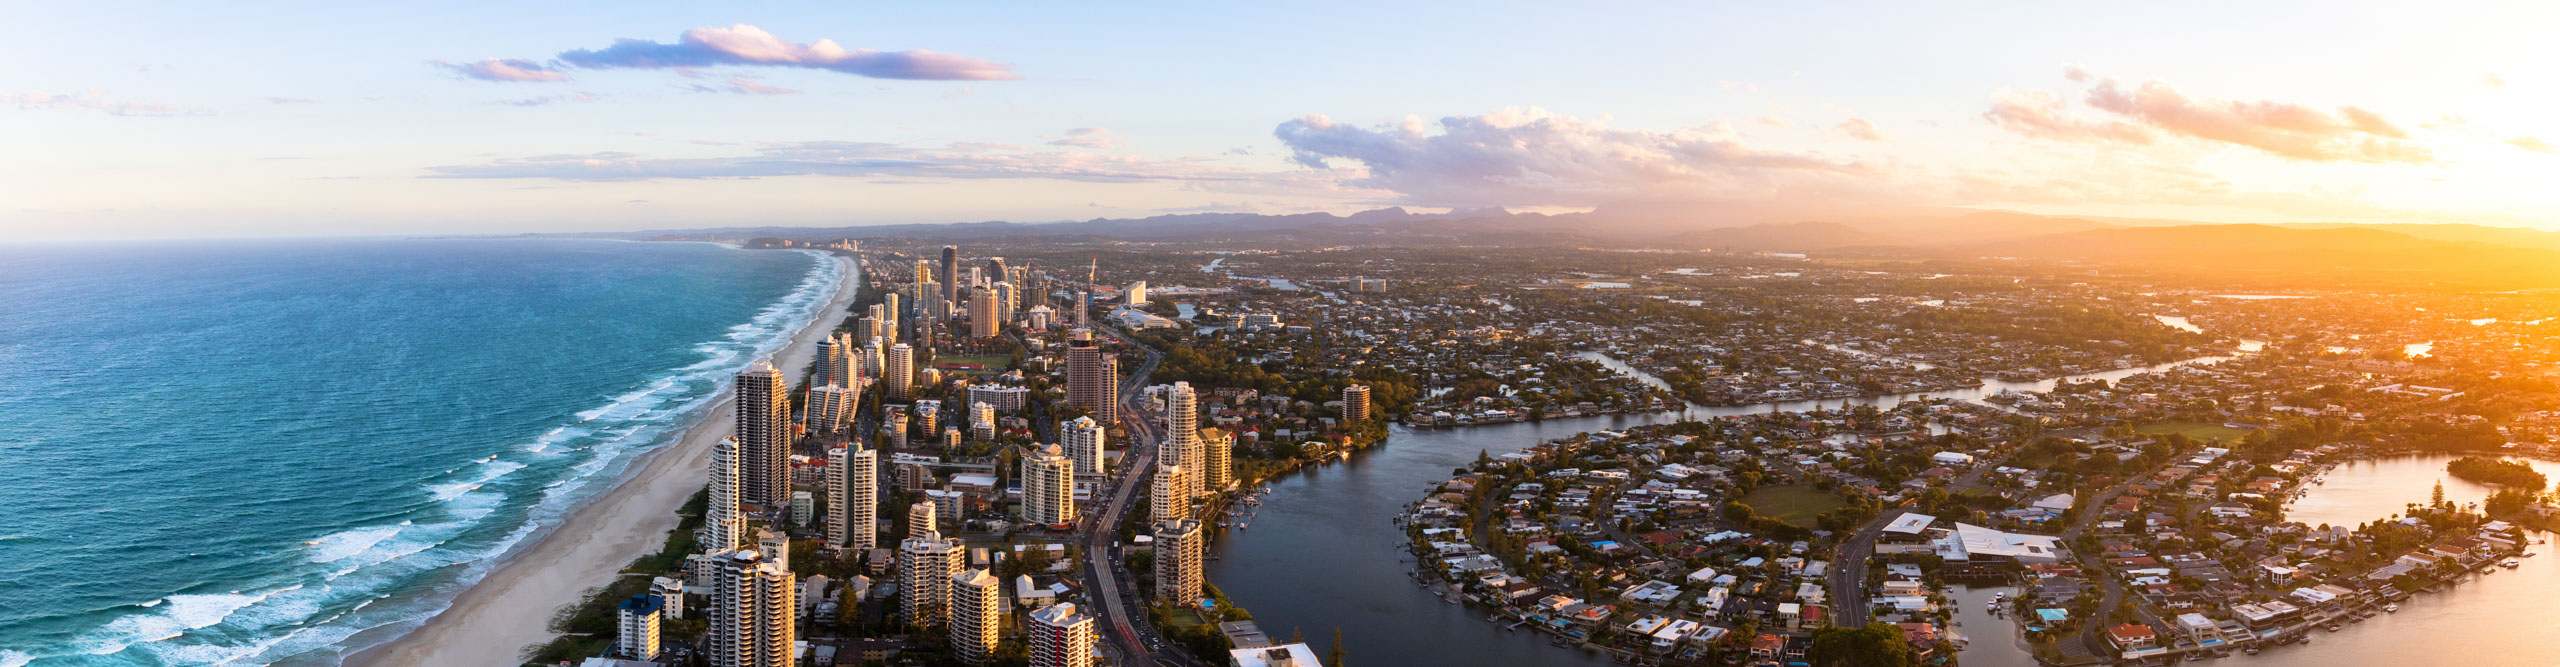 Aerial view of the Gold Coast on a clear sunny day, Queensland, Australia 